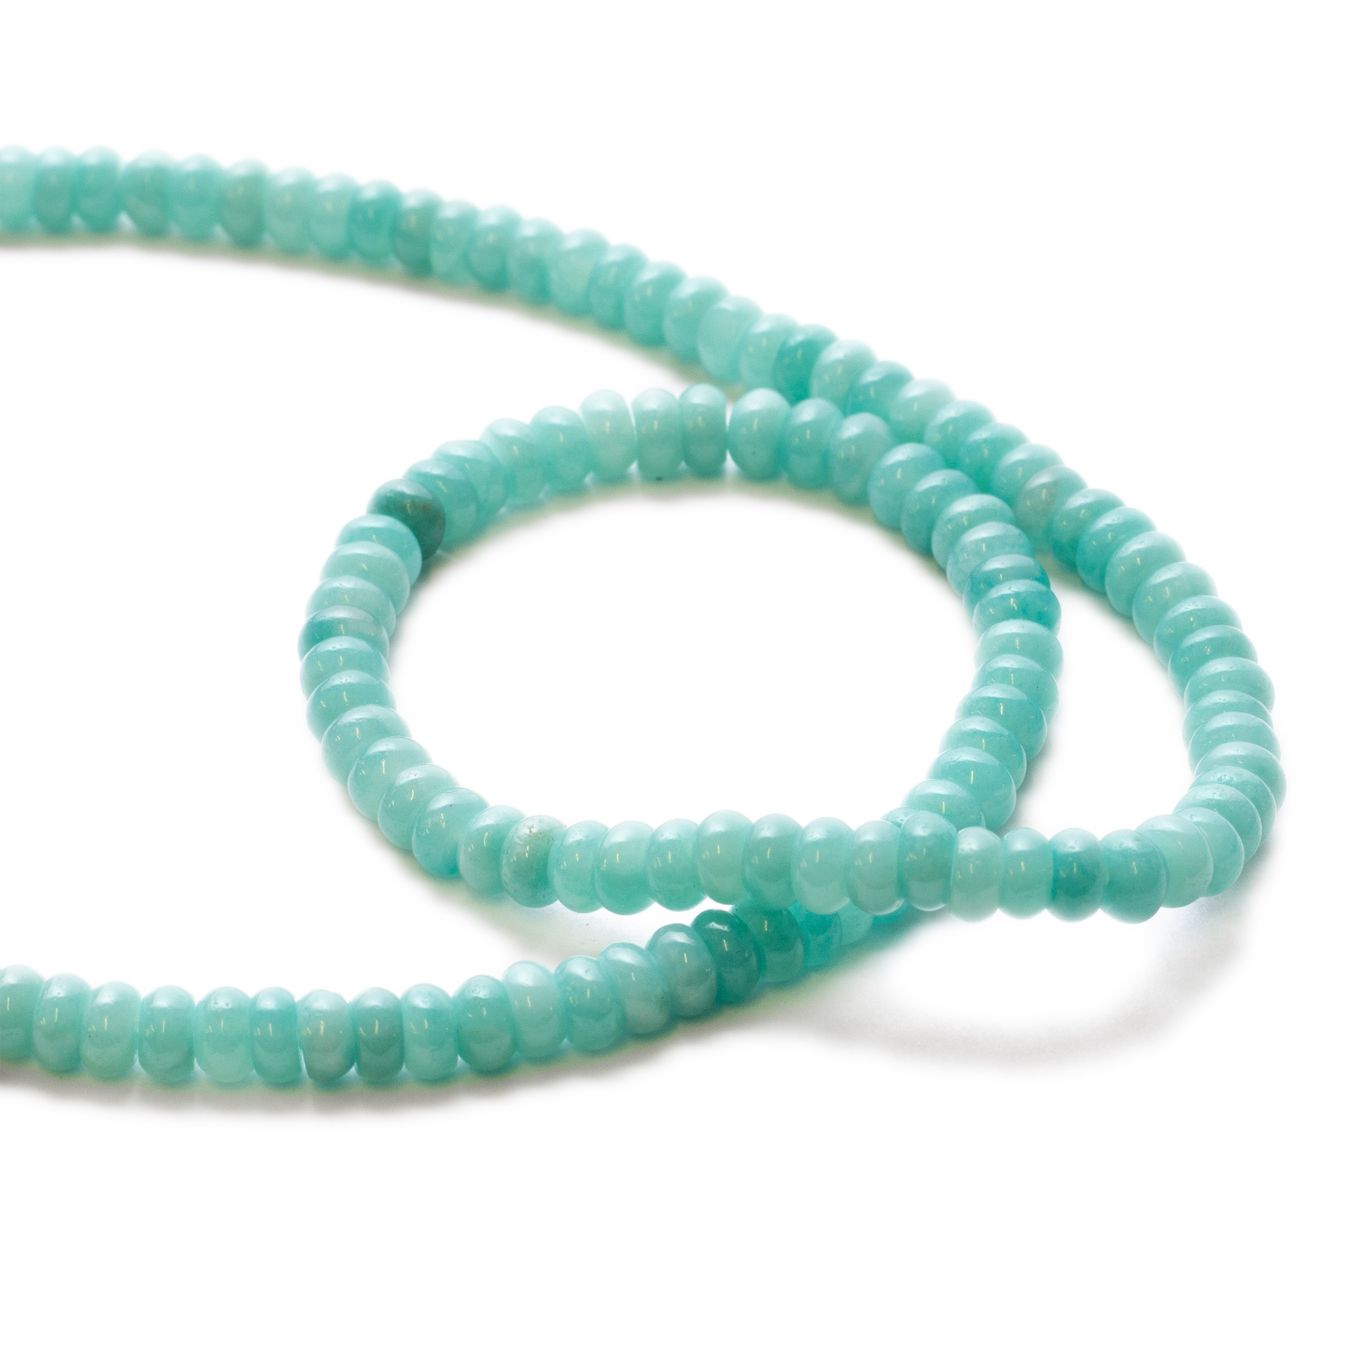 Chinese Amazonite Rondelle Beads - Approx 4mm